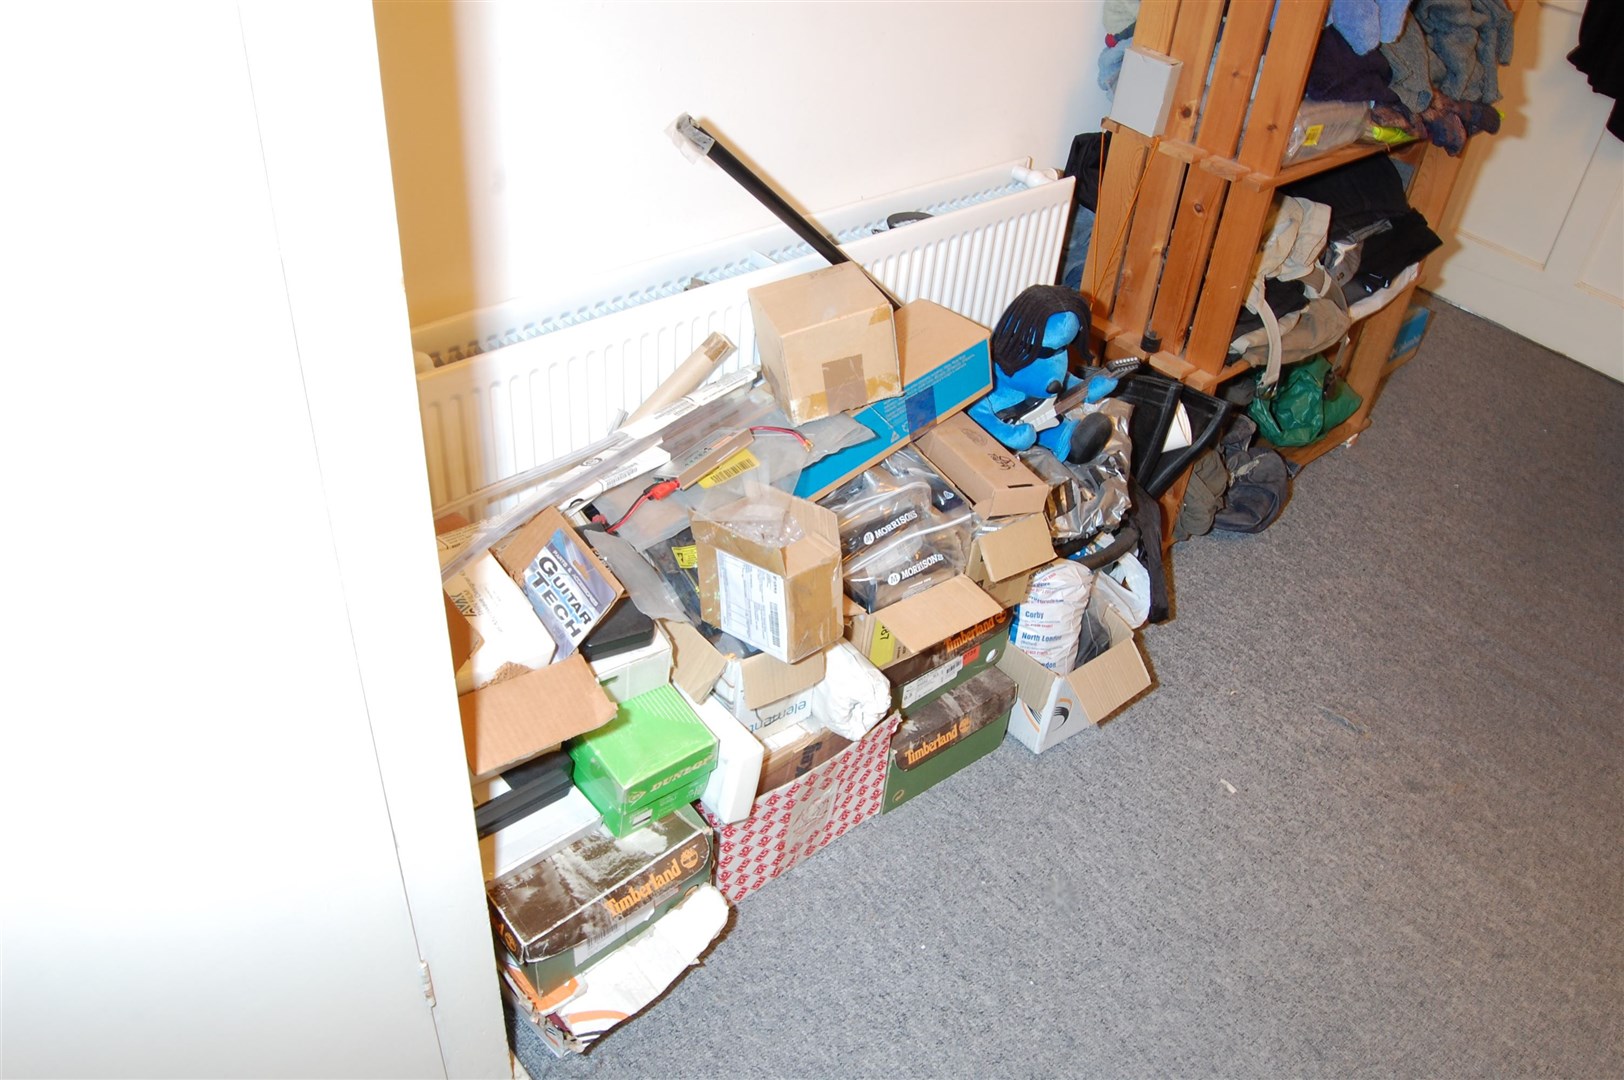 Items found by police at the home of Michael Seed. (Metropolitan Police/PA)